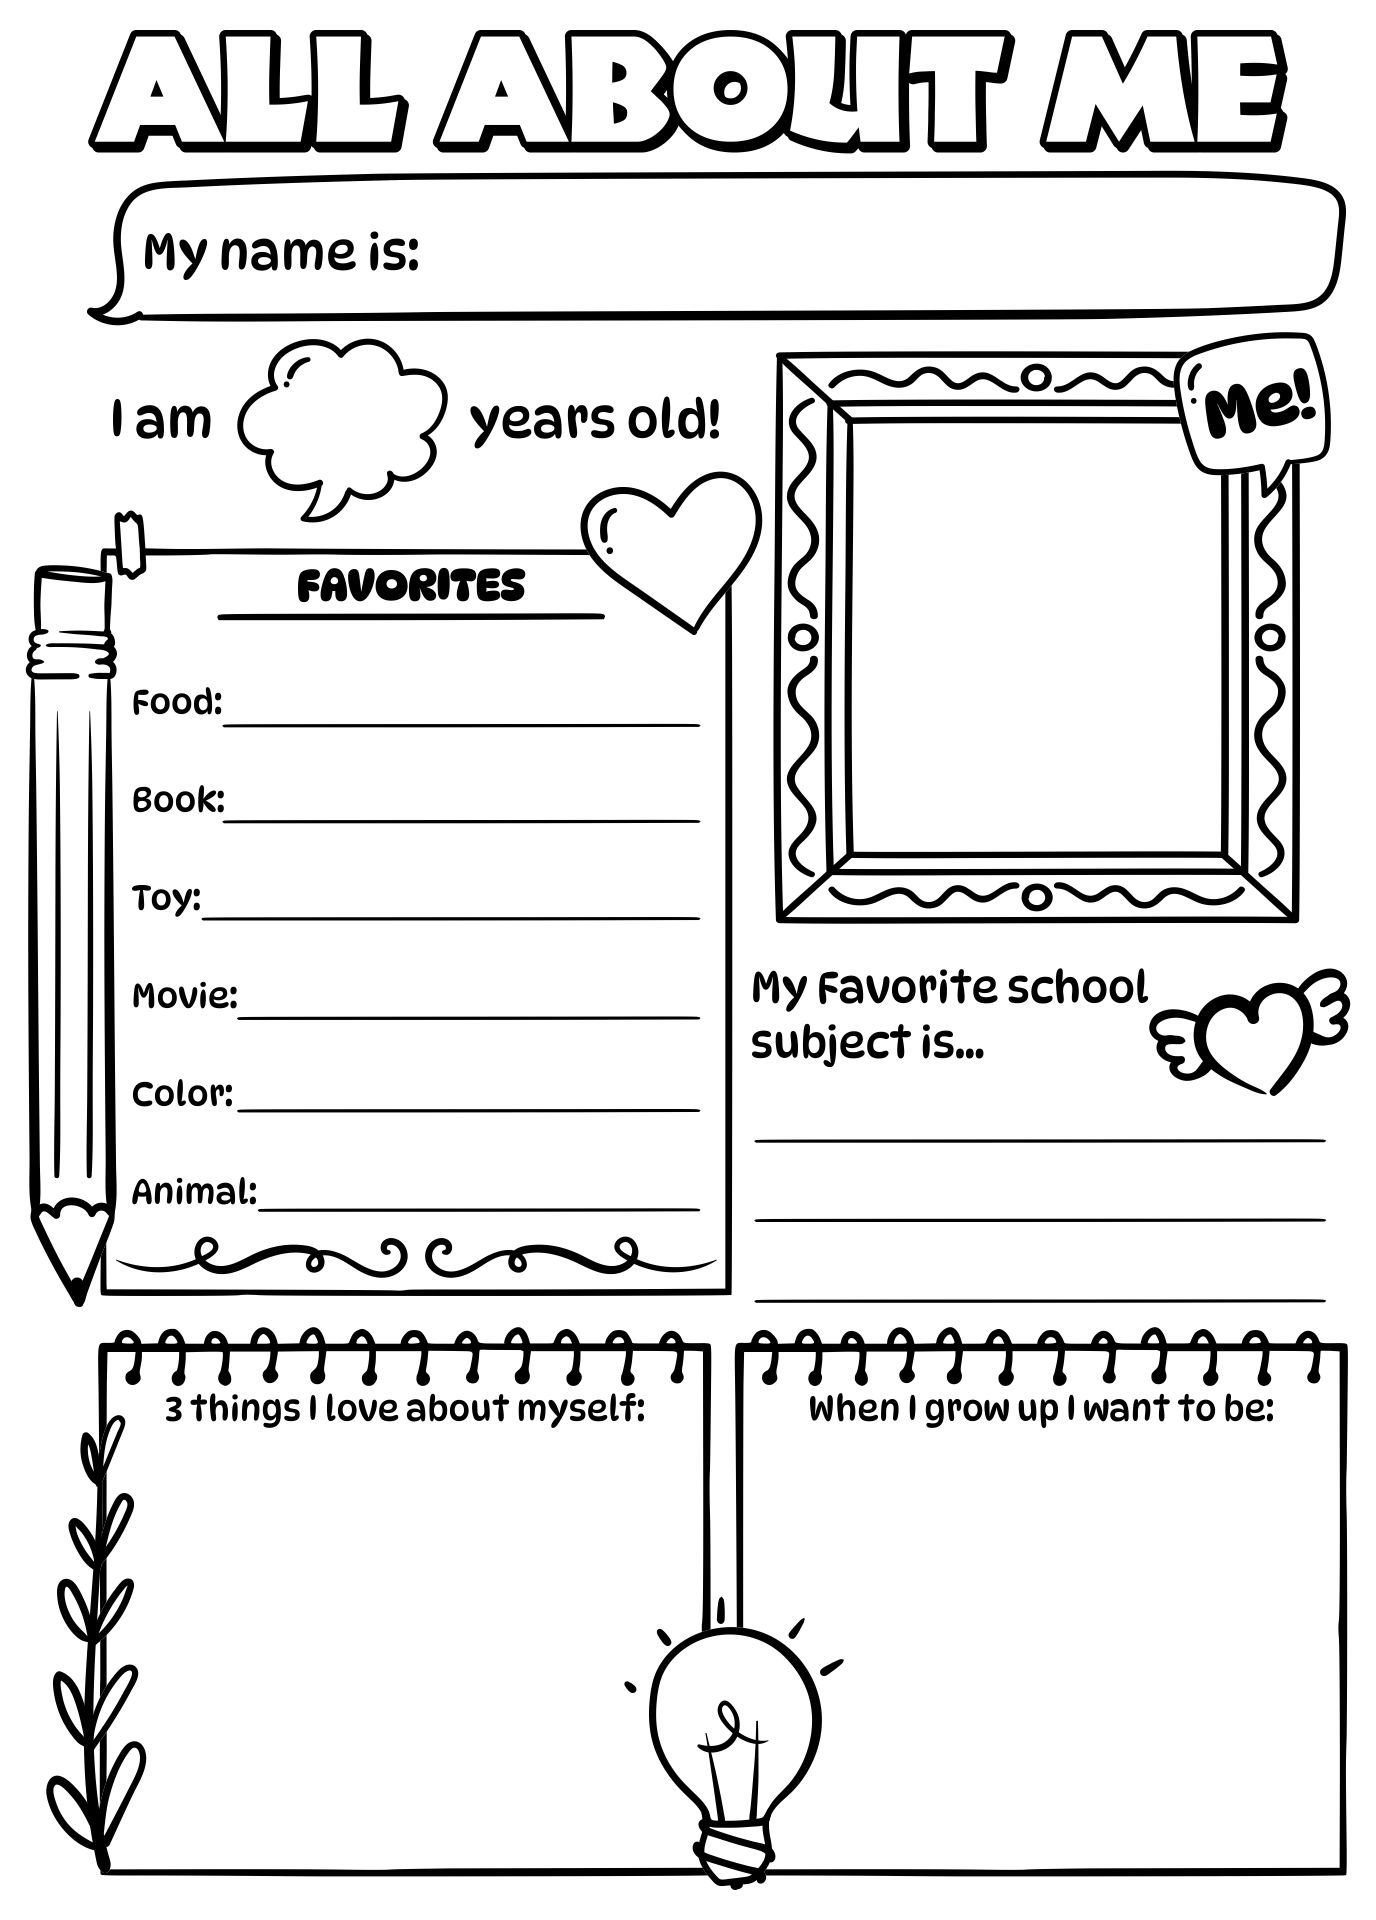 6 Best Images of All About Me Printable Template - All About Me